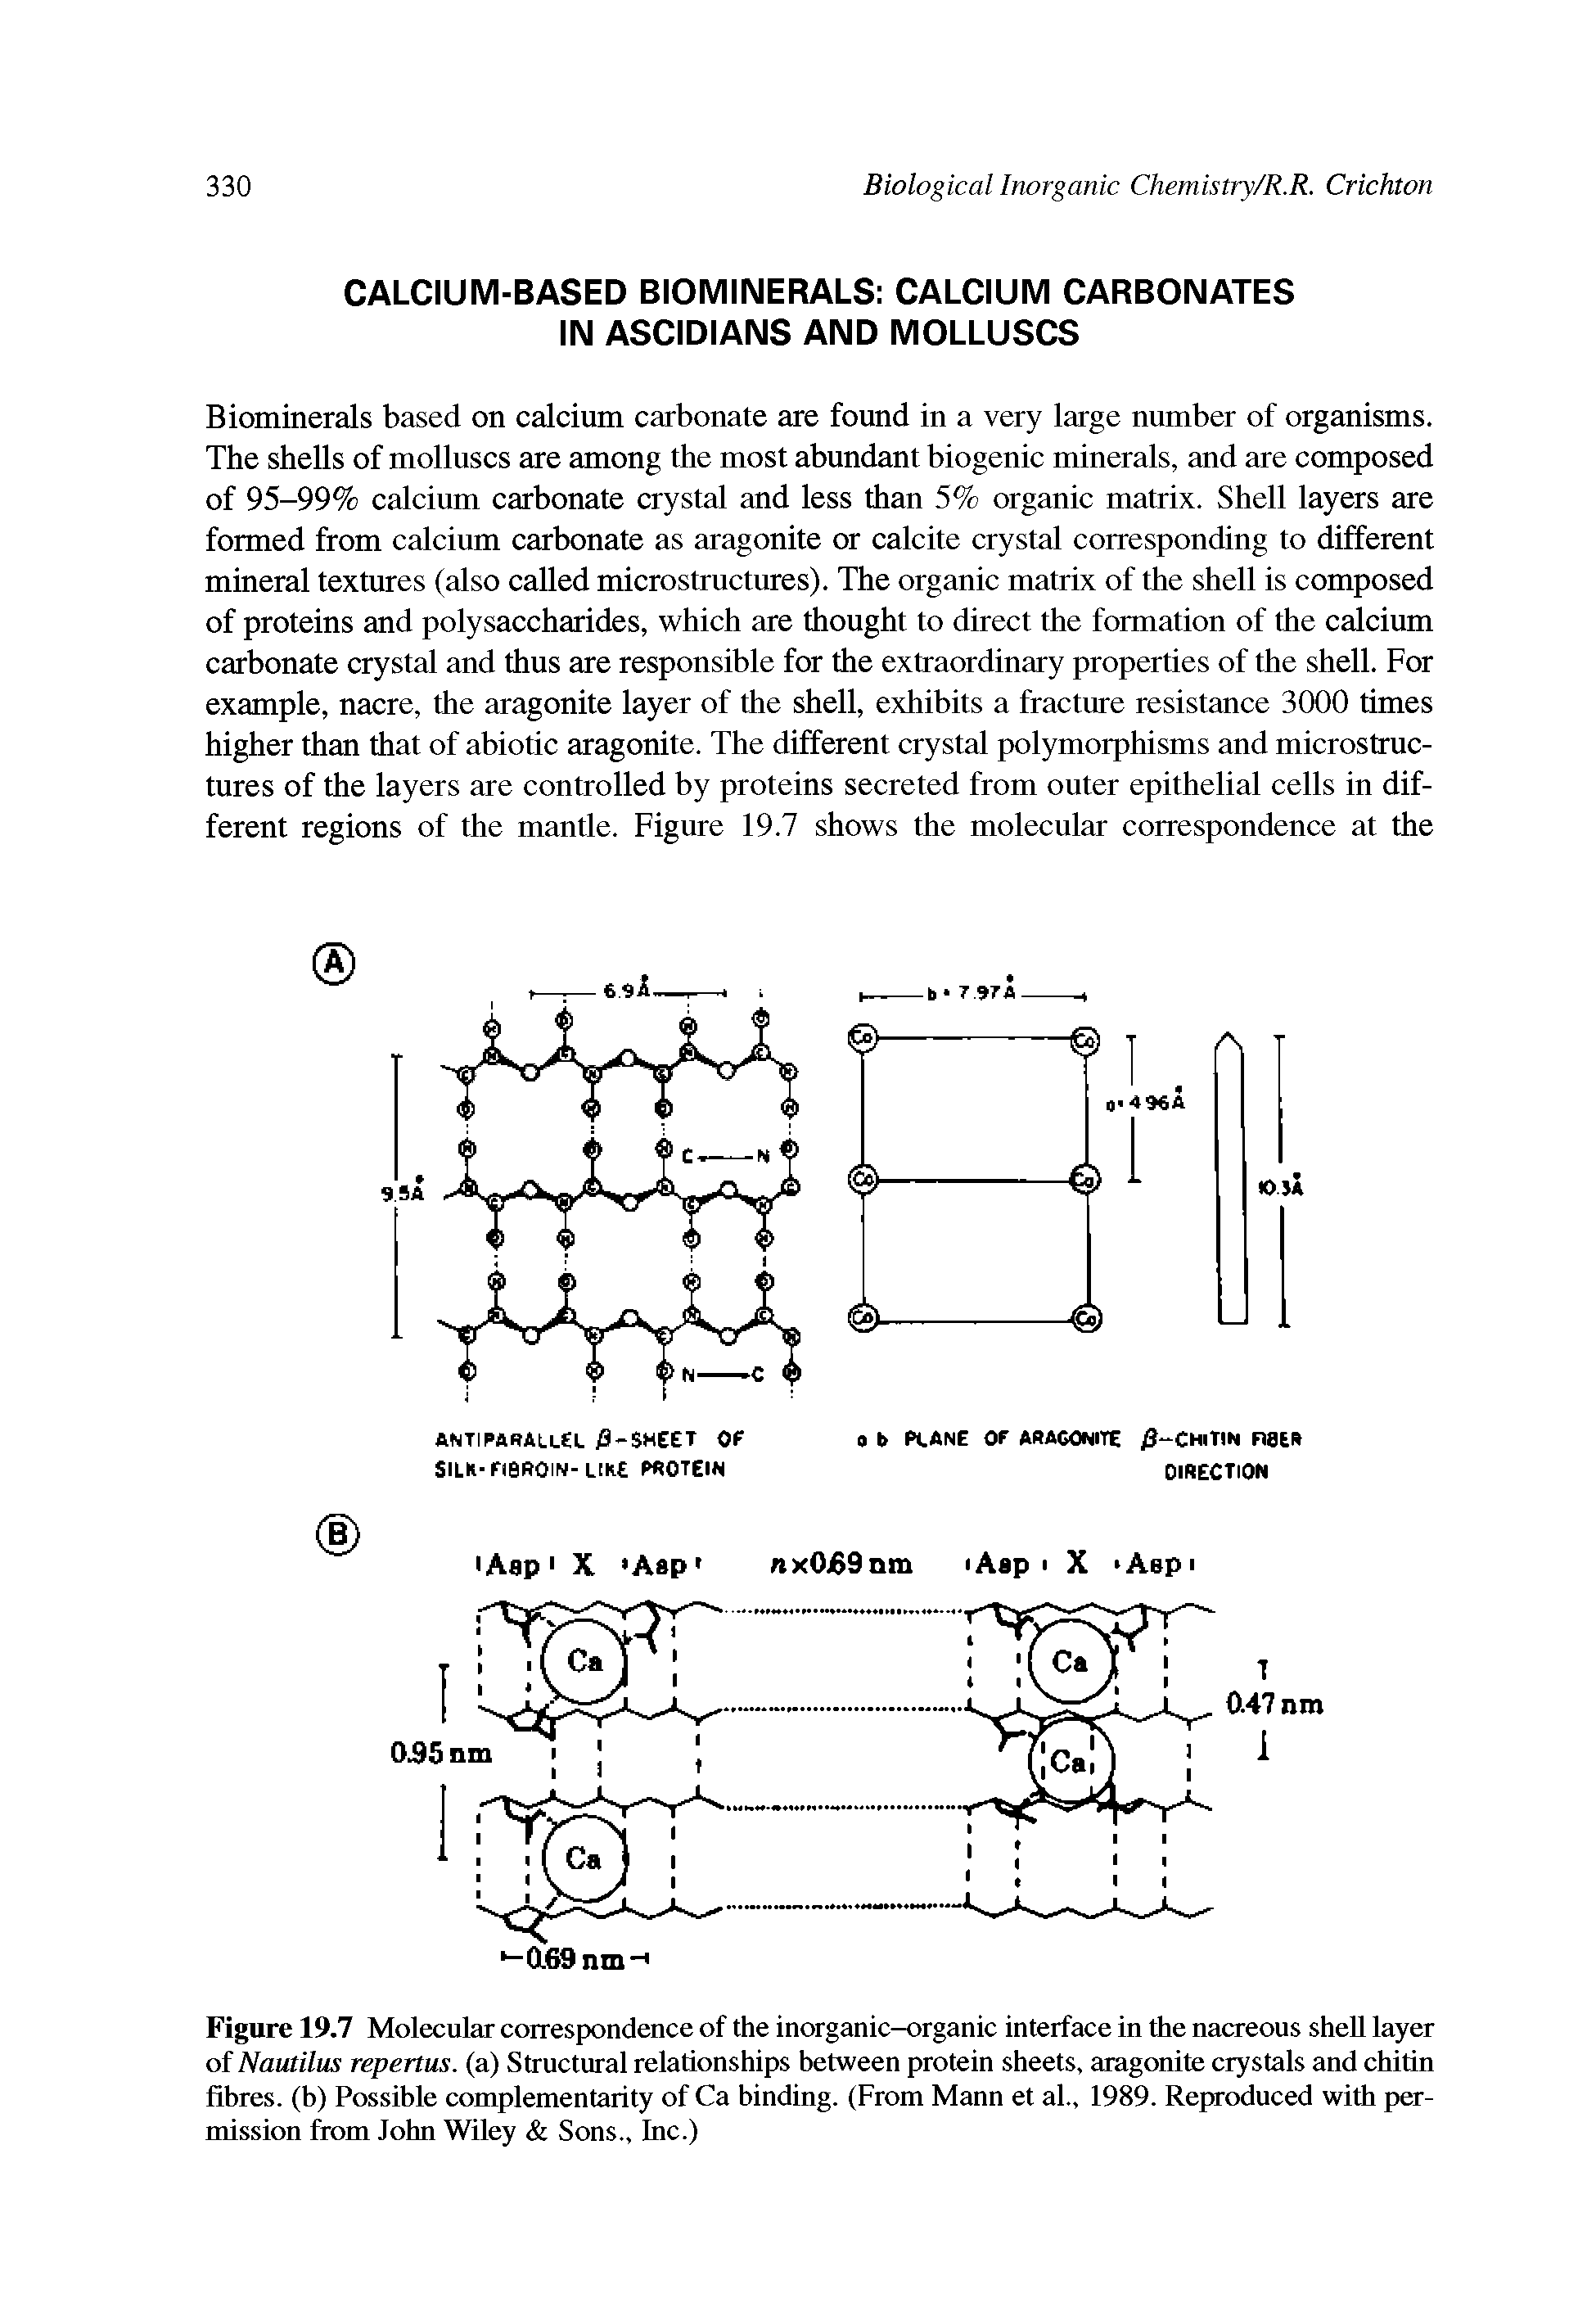 Figure 19.7 Molecular correspondence of the inorganic-organic interface in the nacreous shell layer of Nautilus repertus. (a) Structural relationships between protein sheets, aragonite crystals and chitin fibres, (b) Possible complementarity of Ca binding. (From Mann et al., 1989. Reproduced with permission from John Wiley Sons., Inc.)...